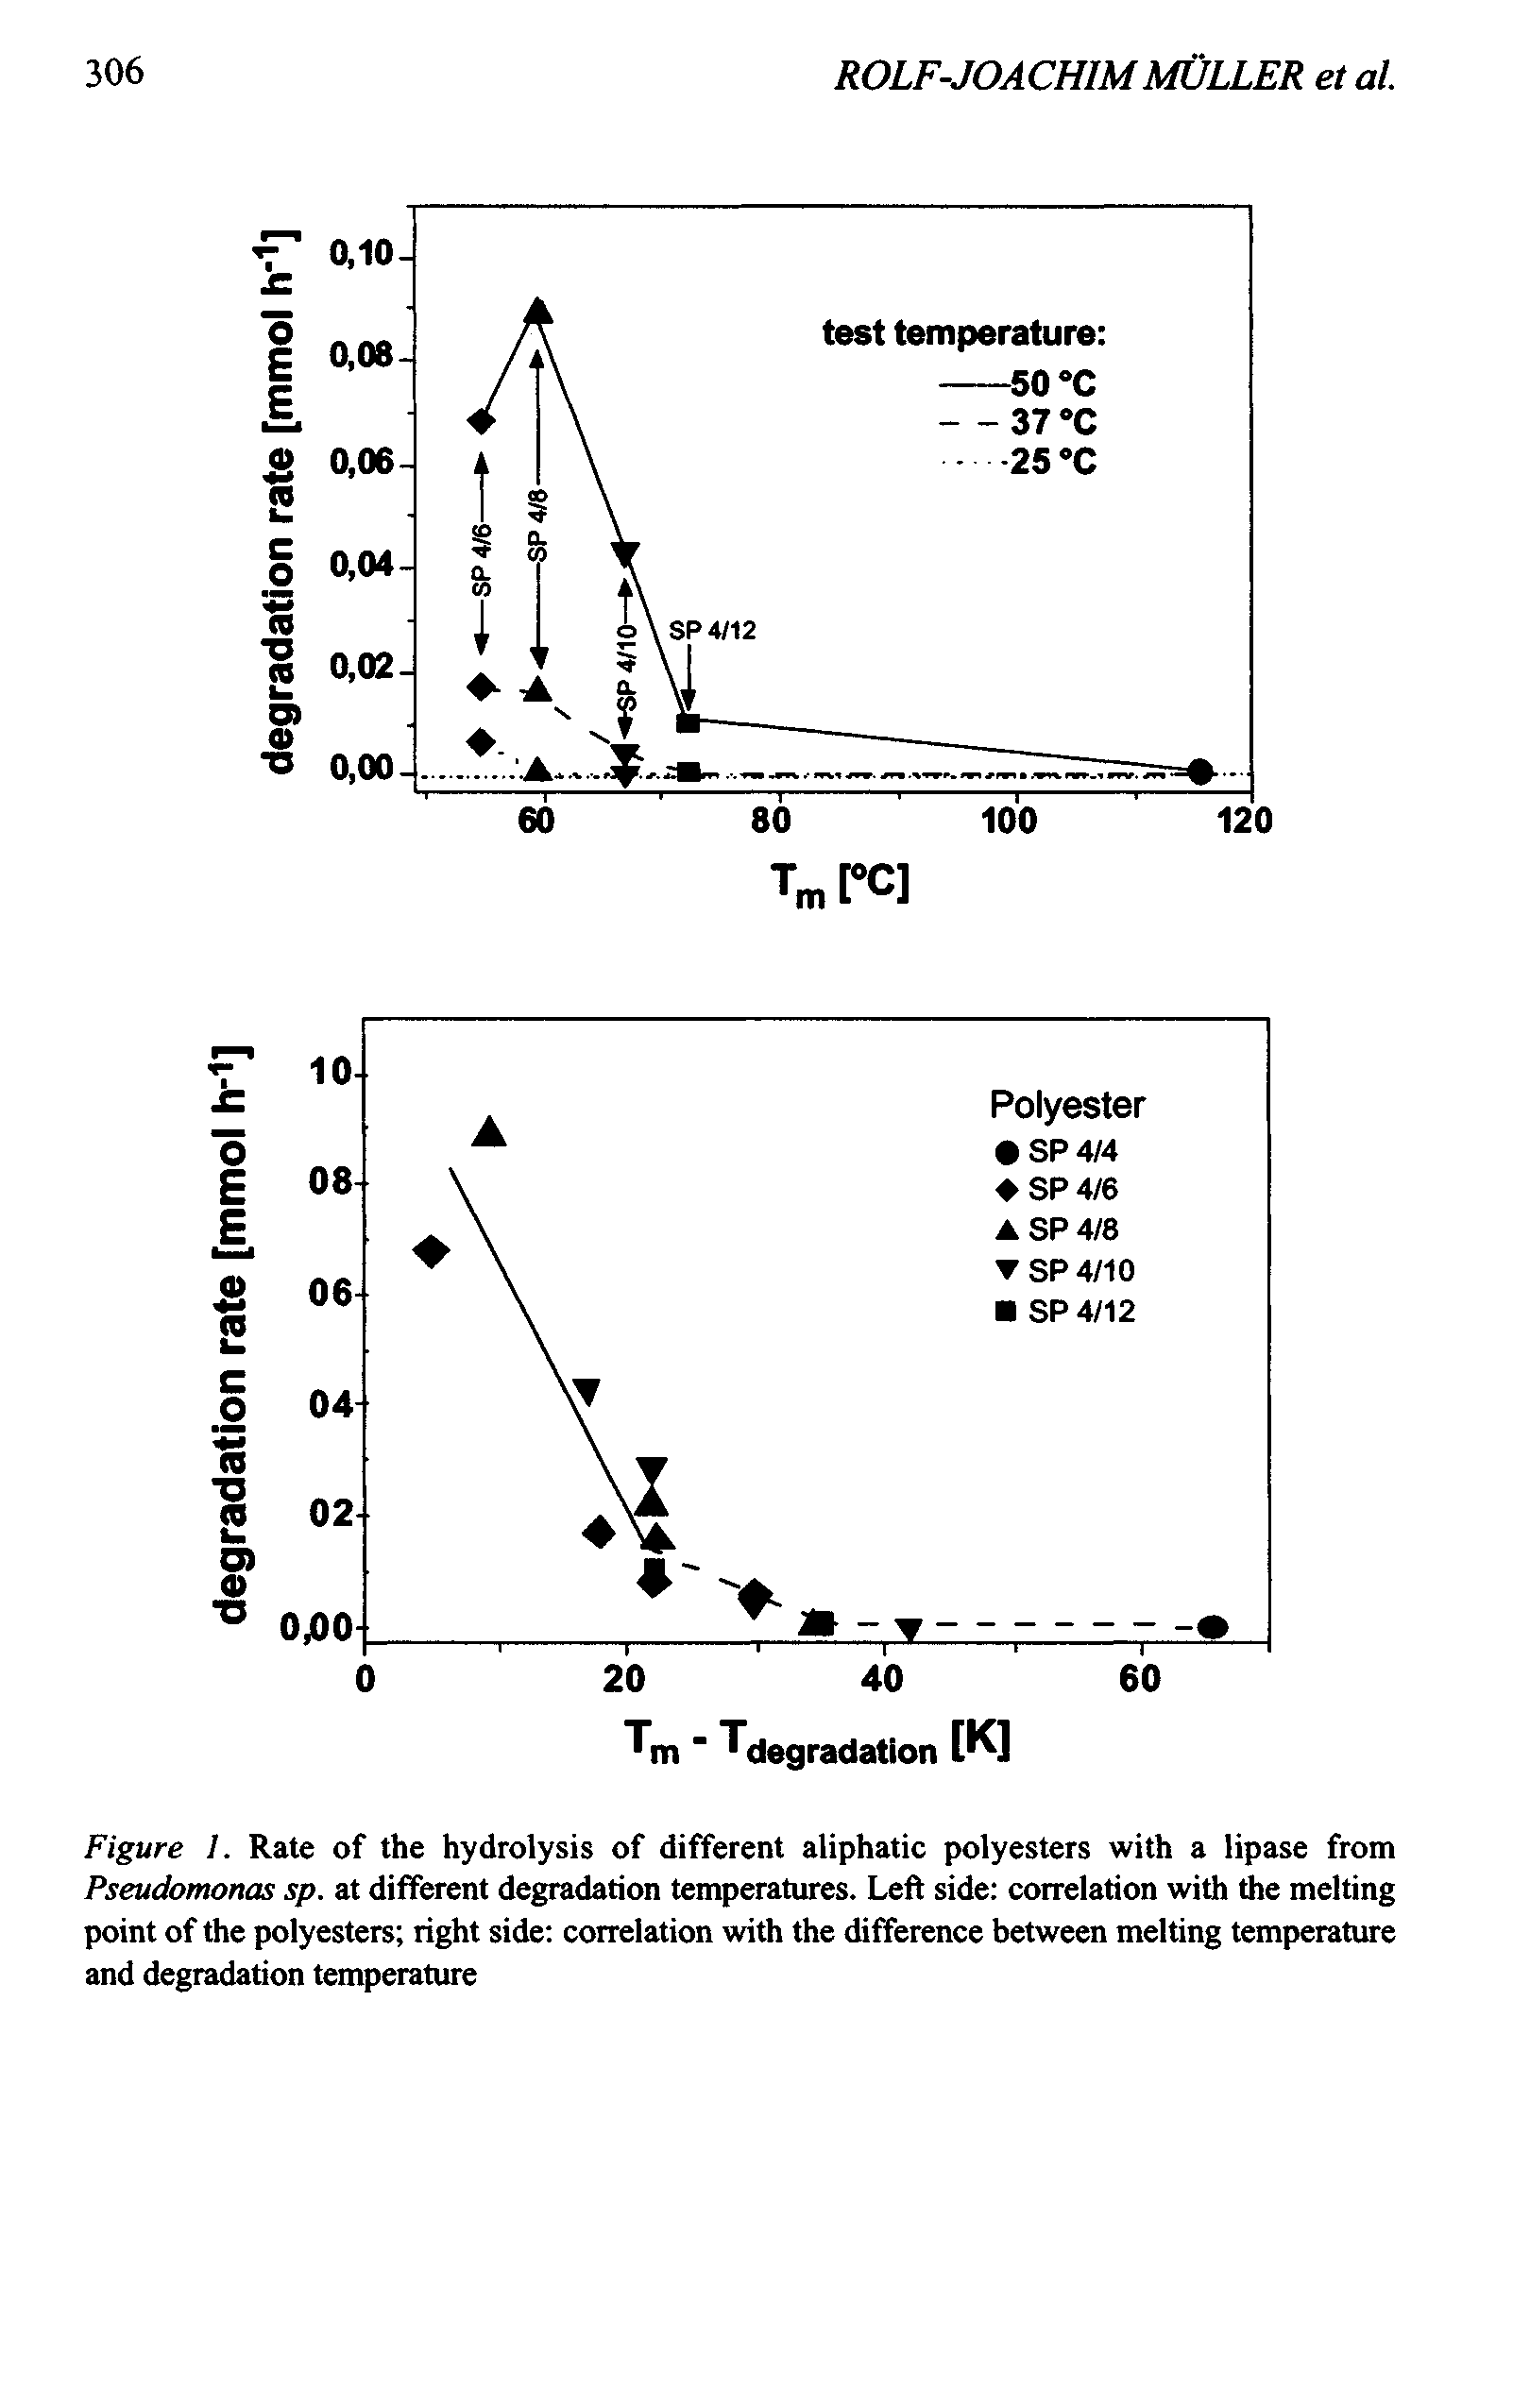 Figure 1. Rate of the hydrolysis of different aliphatic polyesters with a lipase from Pseudomonas sp. at different degradation temperatures. Left side correlation with the melting point of the polyesters right side correlation with the difference between melting temperature and degradation temperature...